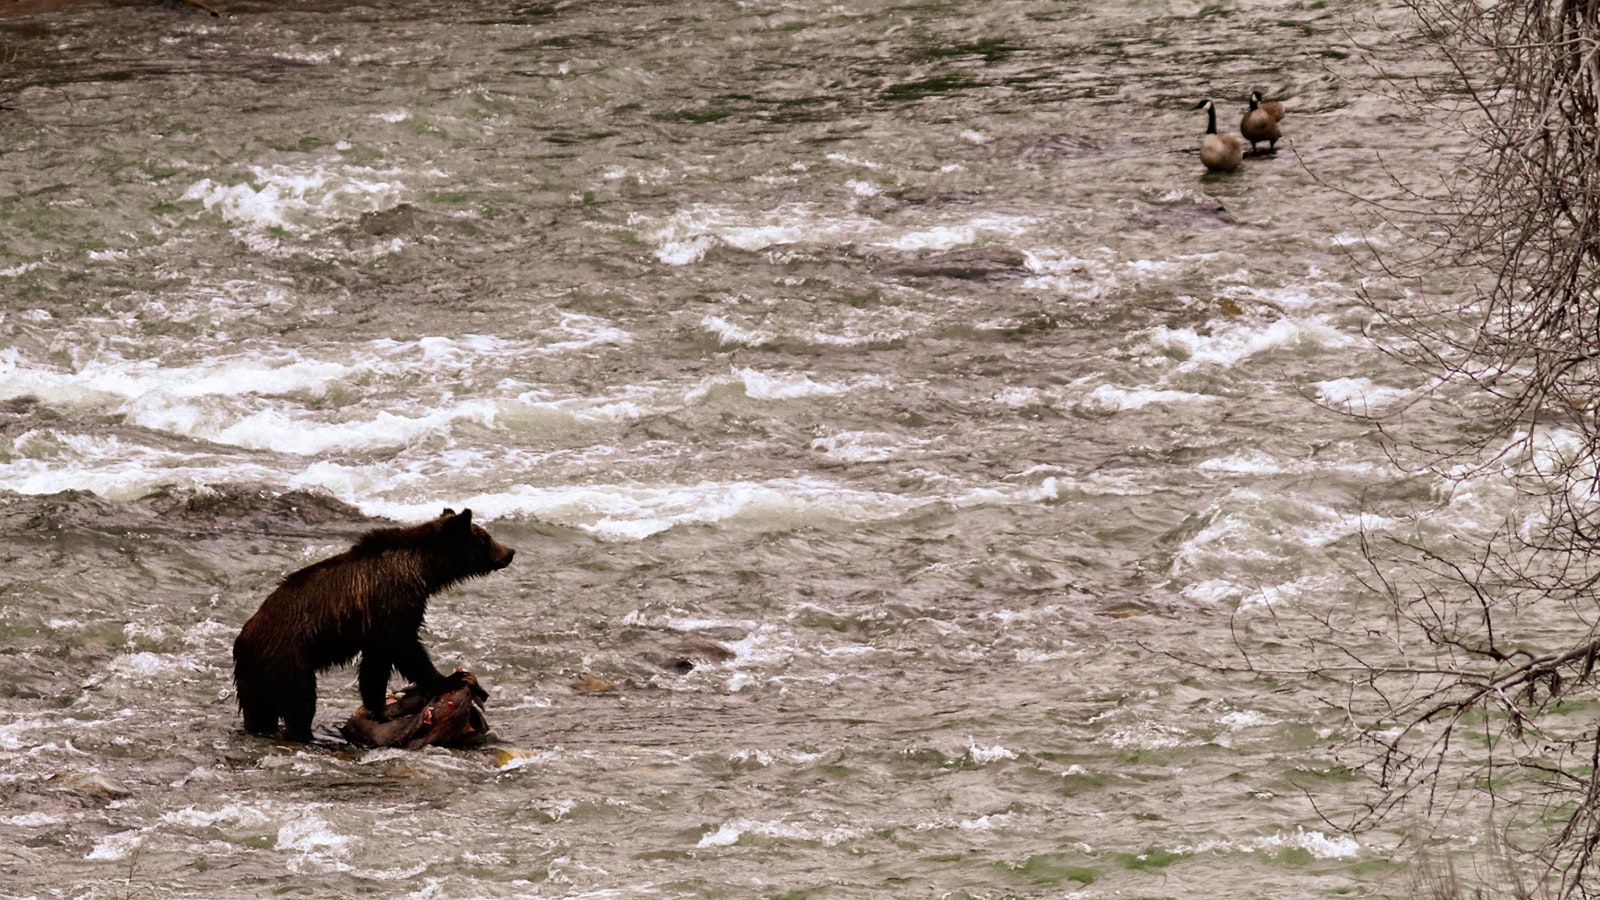 A young male grizzly and a pair of Canada geese eyeball each other in the Hoback River near Pinedale. The critters kept their distance from each other and no fights broke out.